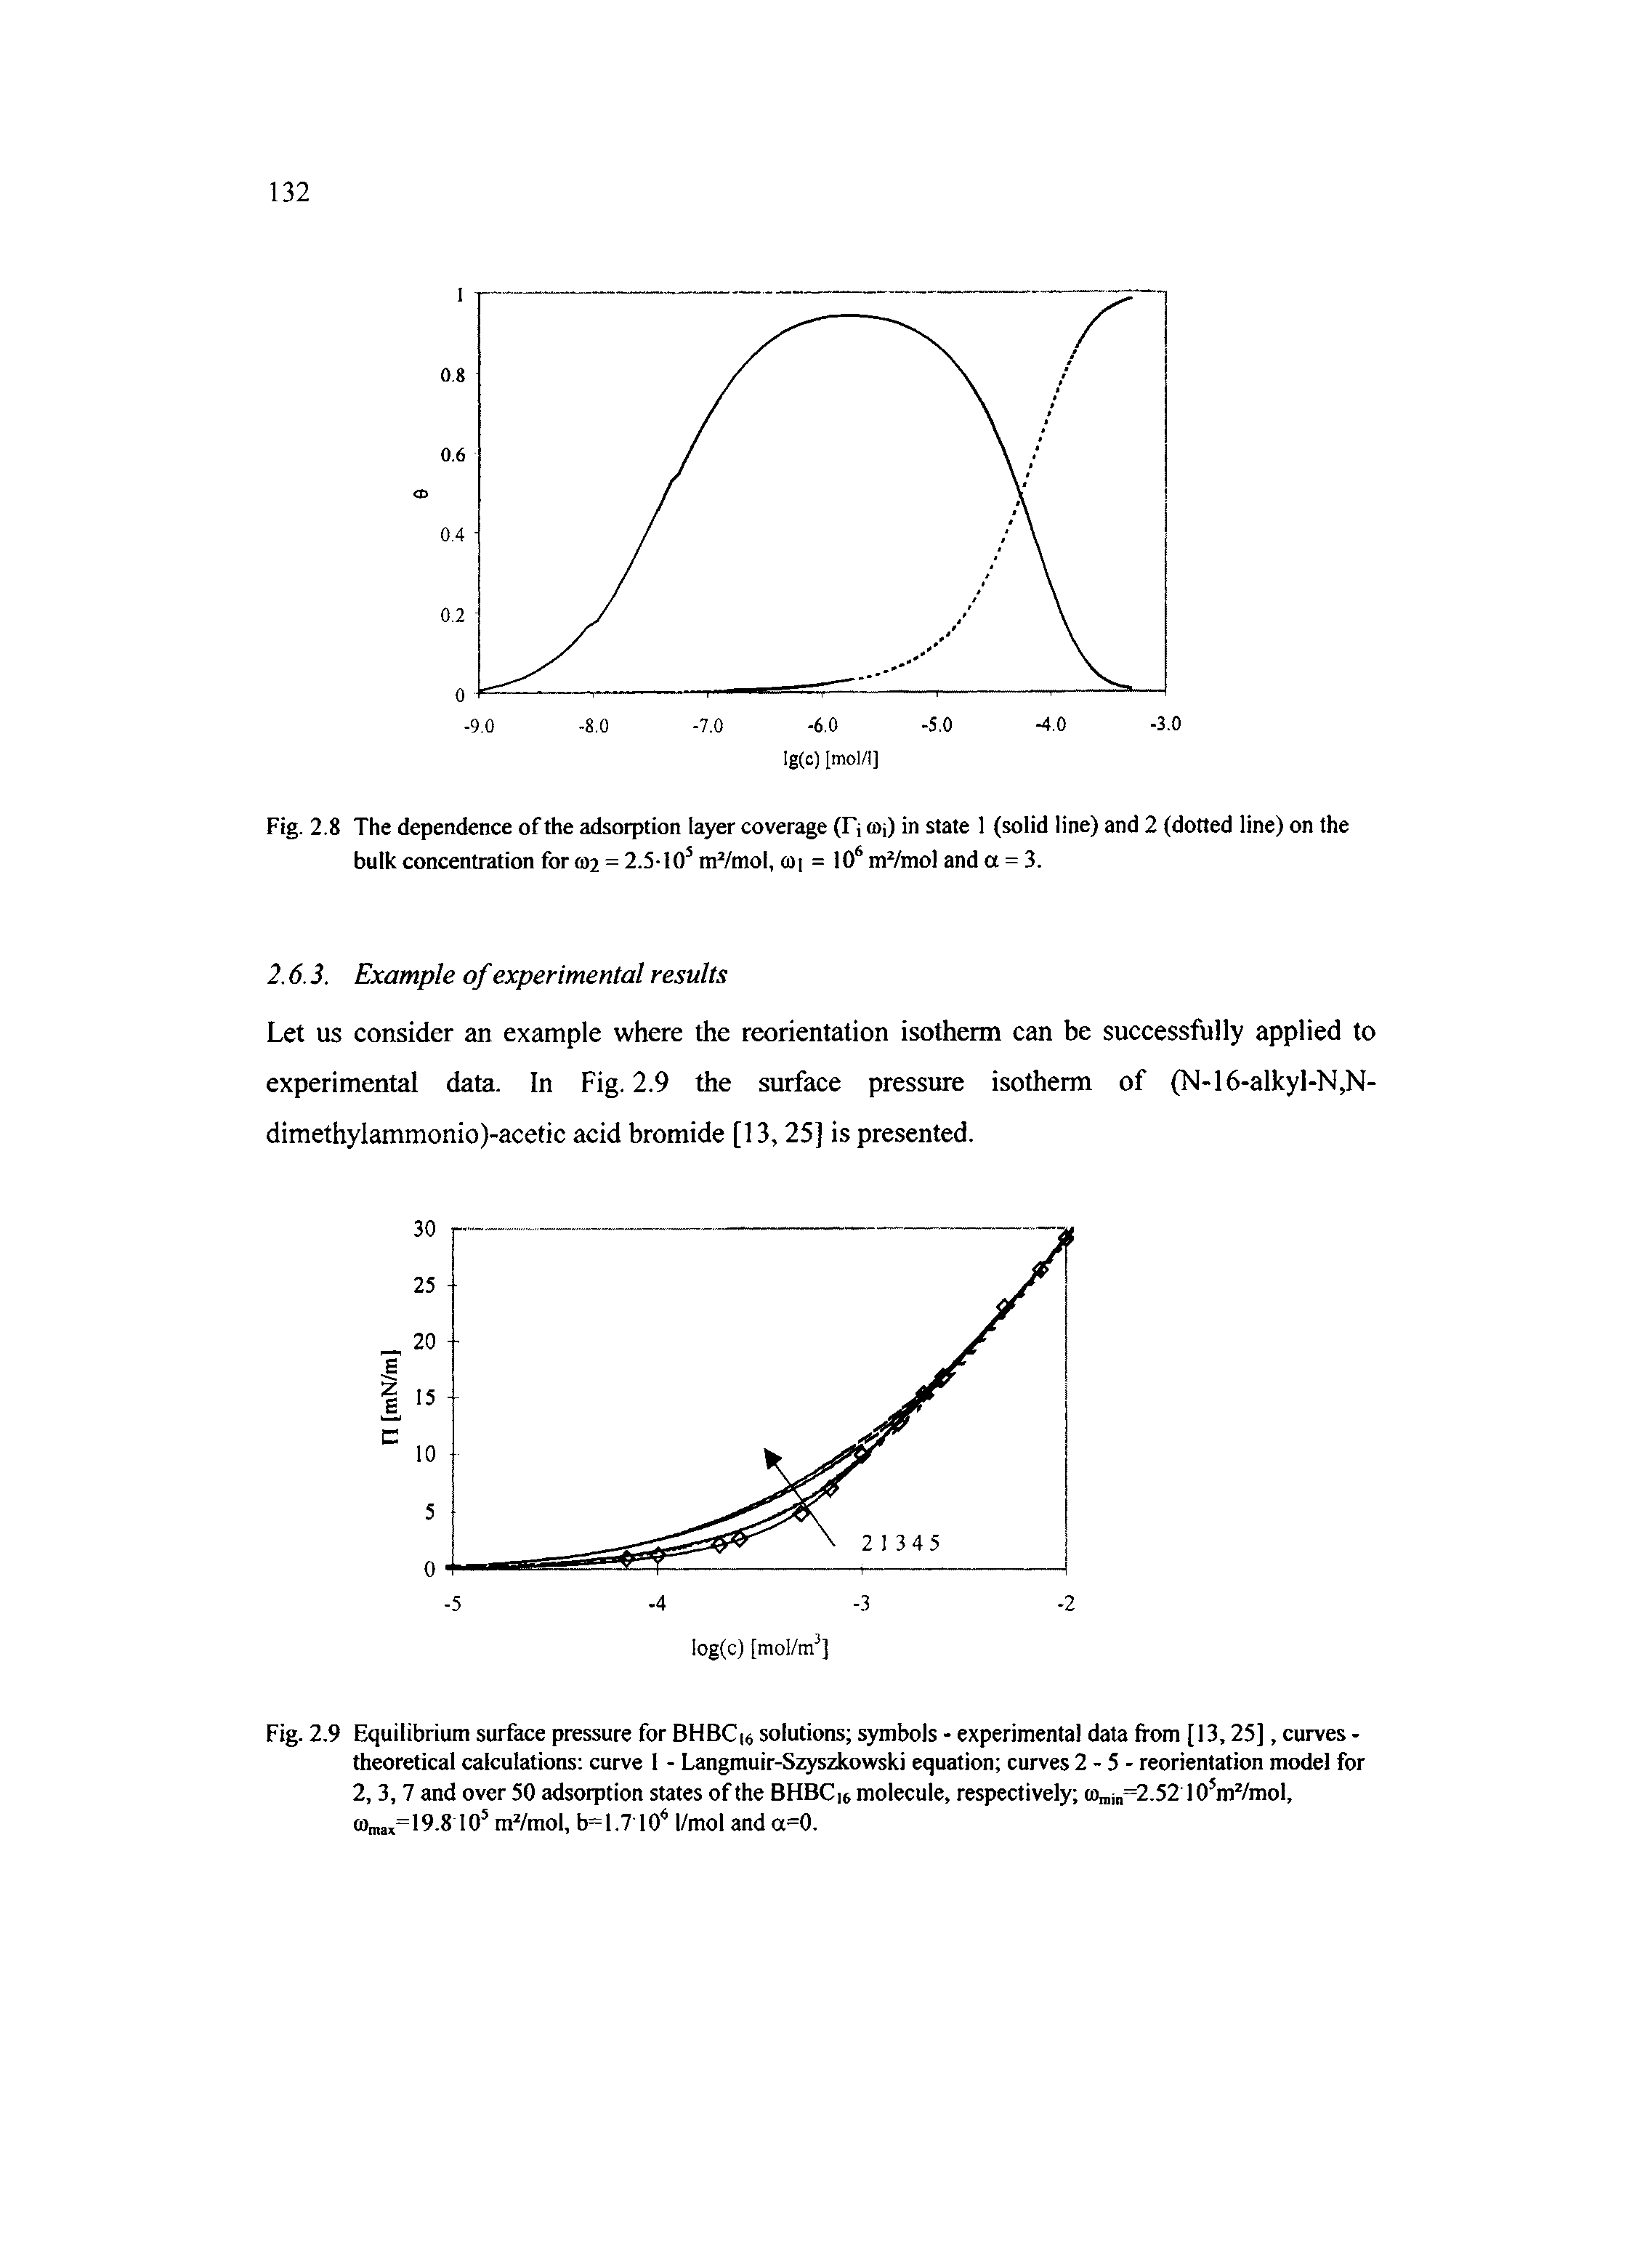 Fig. 2.9 Equilibrium surface pressure for BHBCi solutions symbols - experimental data from [13,25], curves -theoretical calculations curve 1 - Langmuir-Szyszkowski equation curves 2 - 5 - reorientation model for 2, 3, 7 and over 50 adsorption states of the BHBCie molecule, respectively (n j =2.52 lO mVmol,...